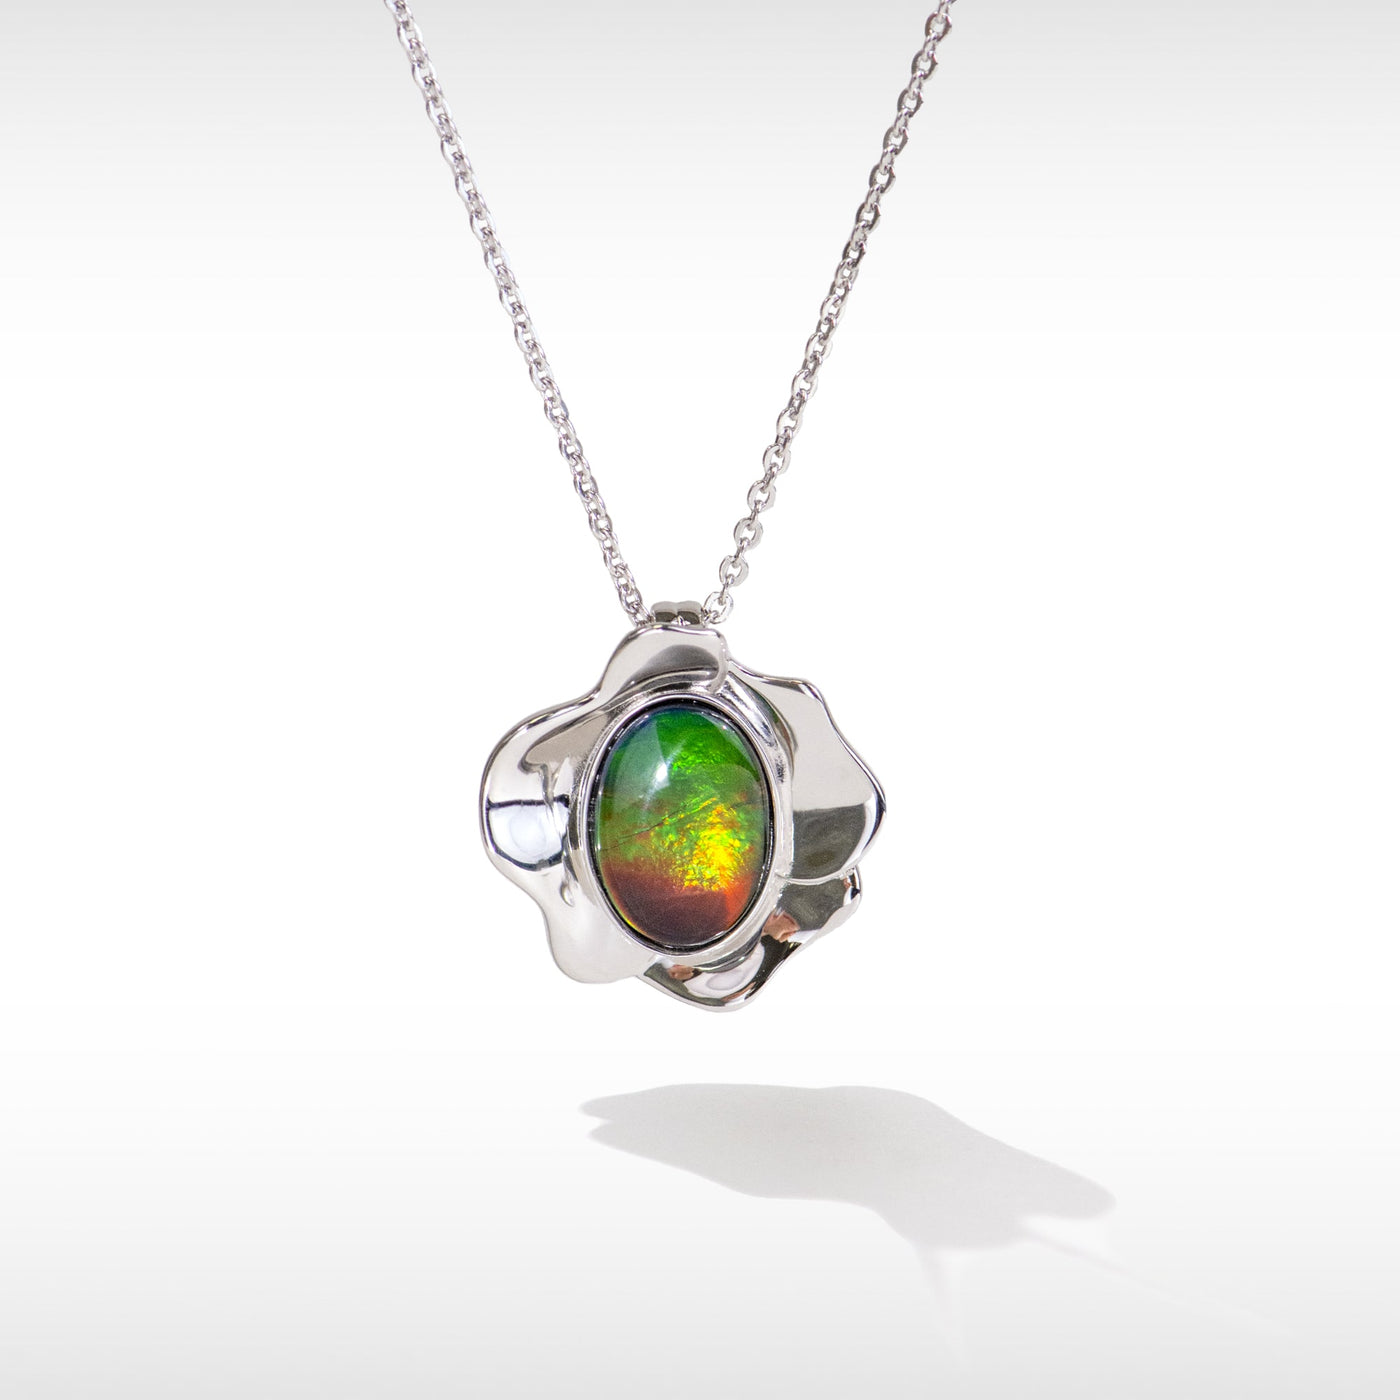 Bloom ammolite pendant and earring set in sterling silver